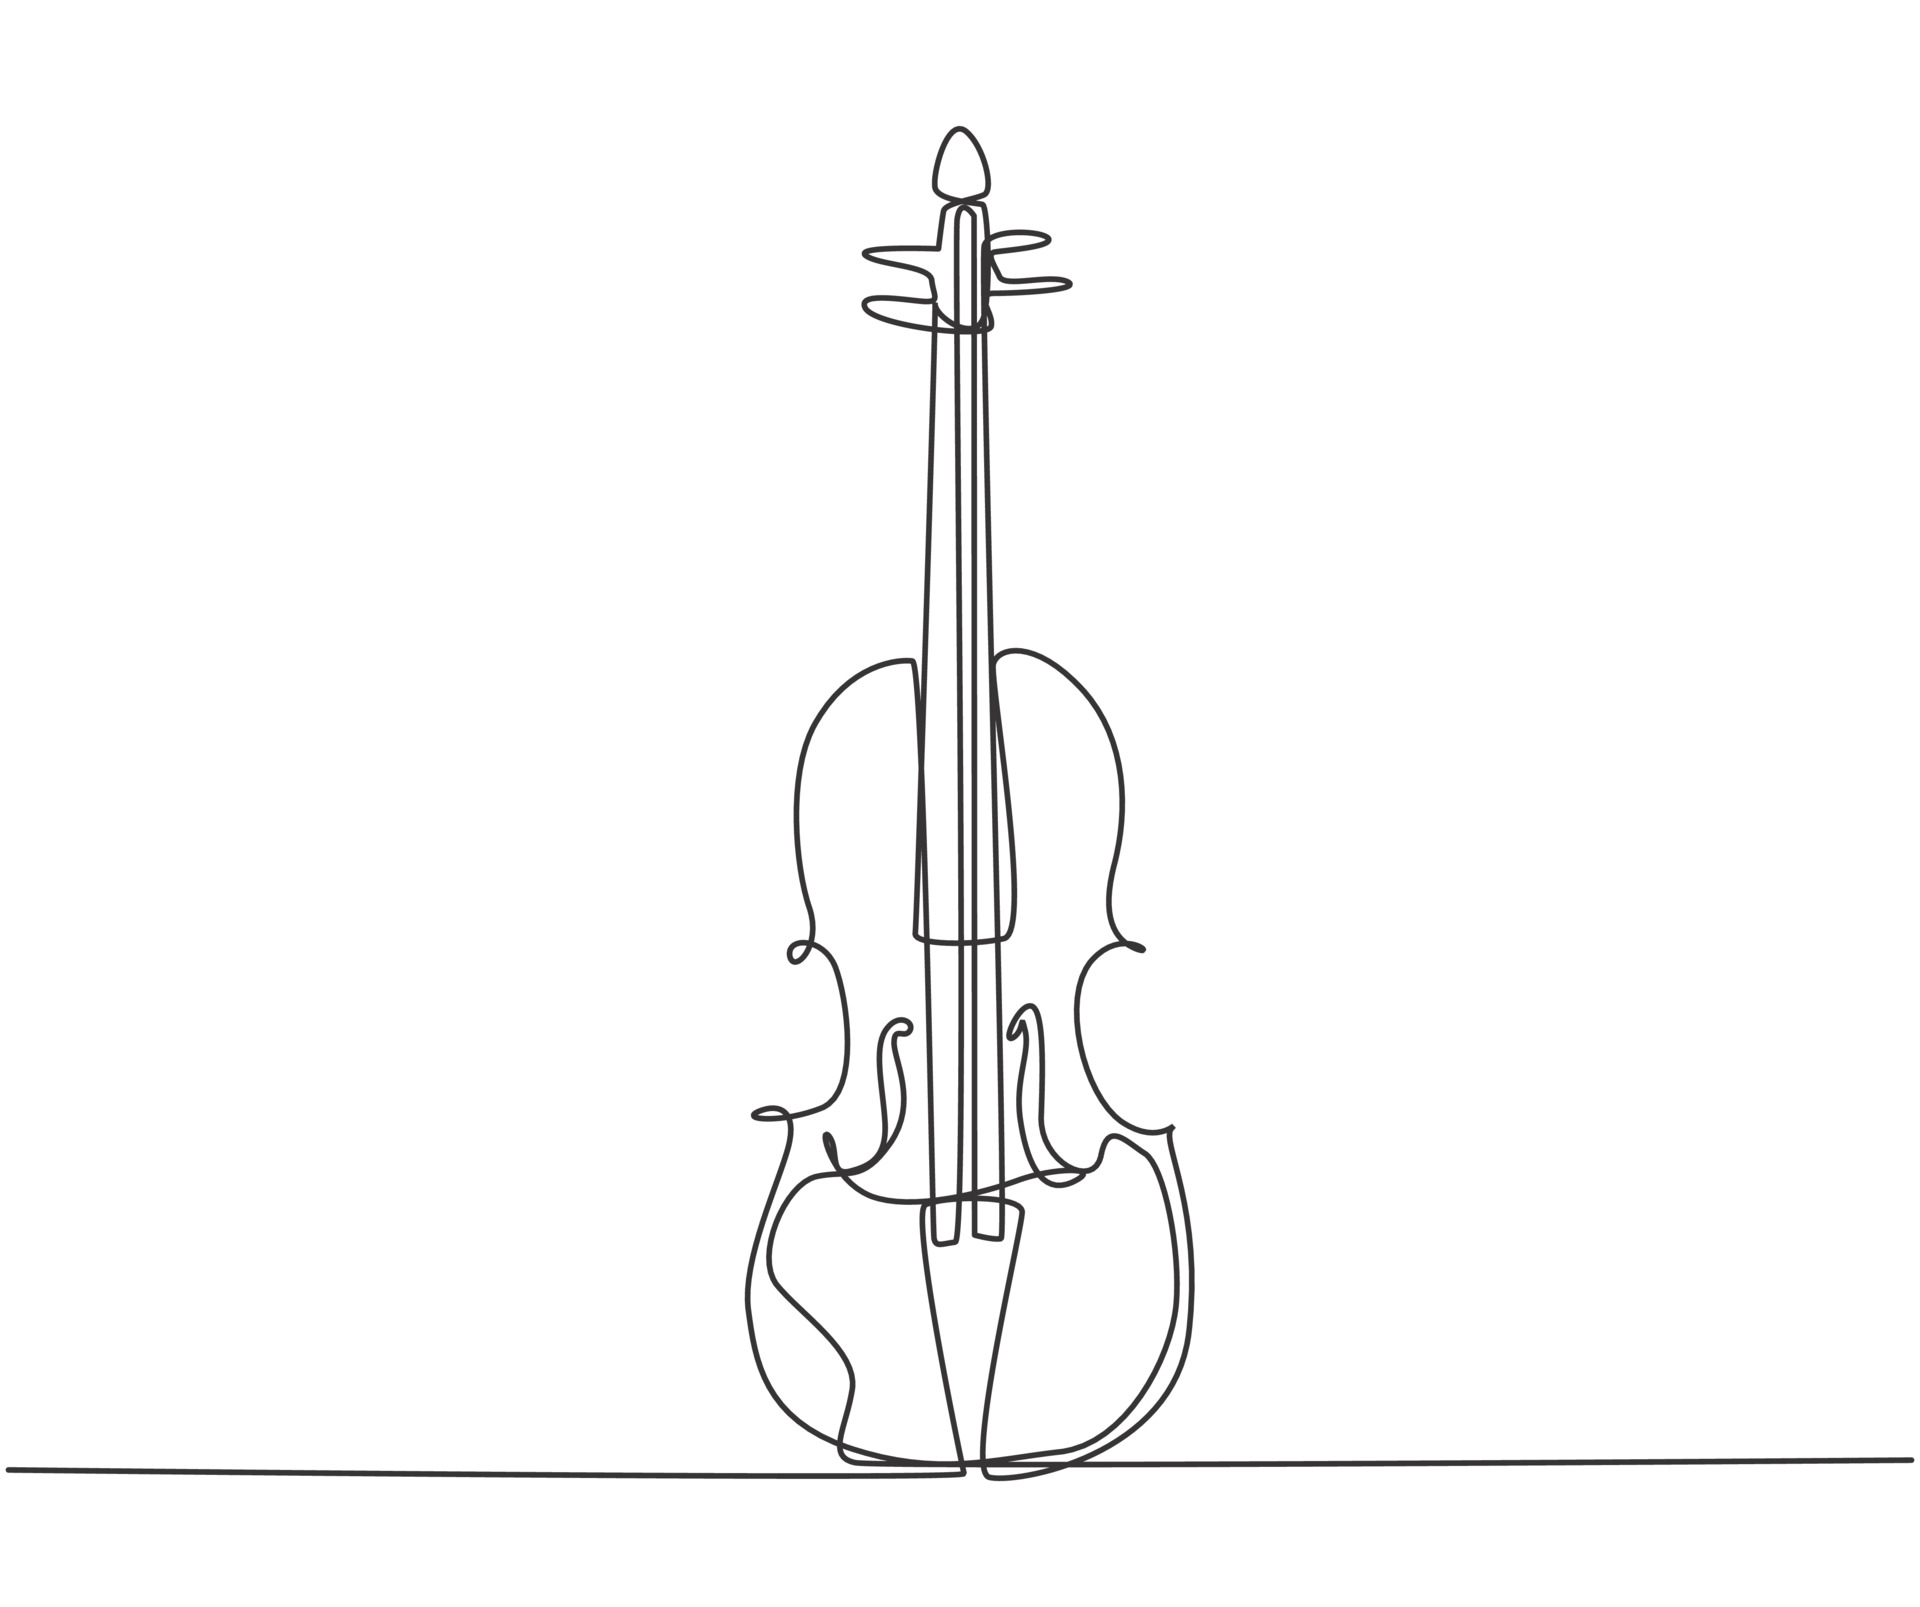 Coordination in Fast Repetitive Violin-Bowing Patterns | PLOS ONE